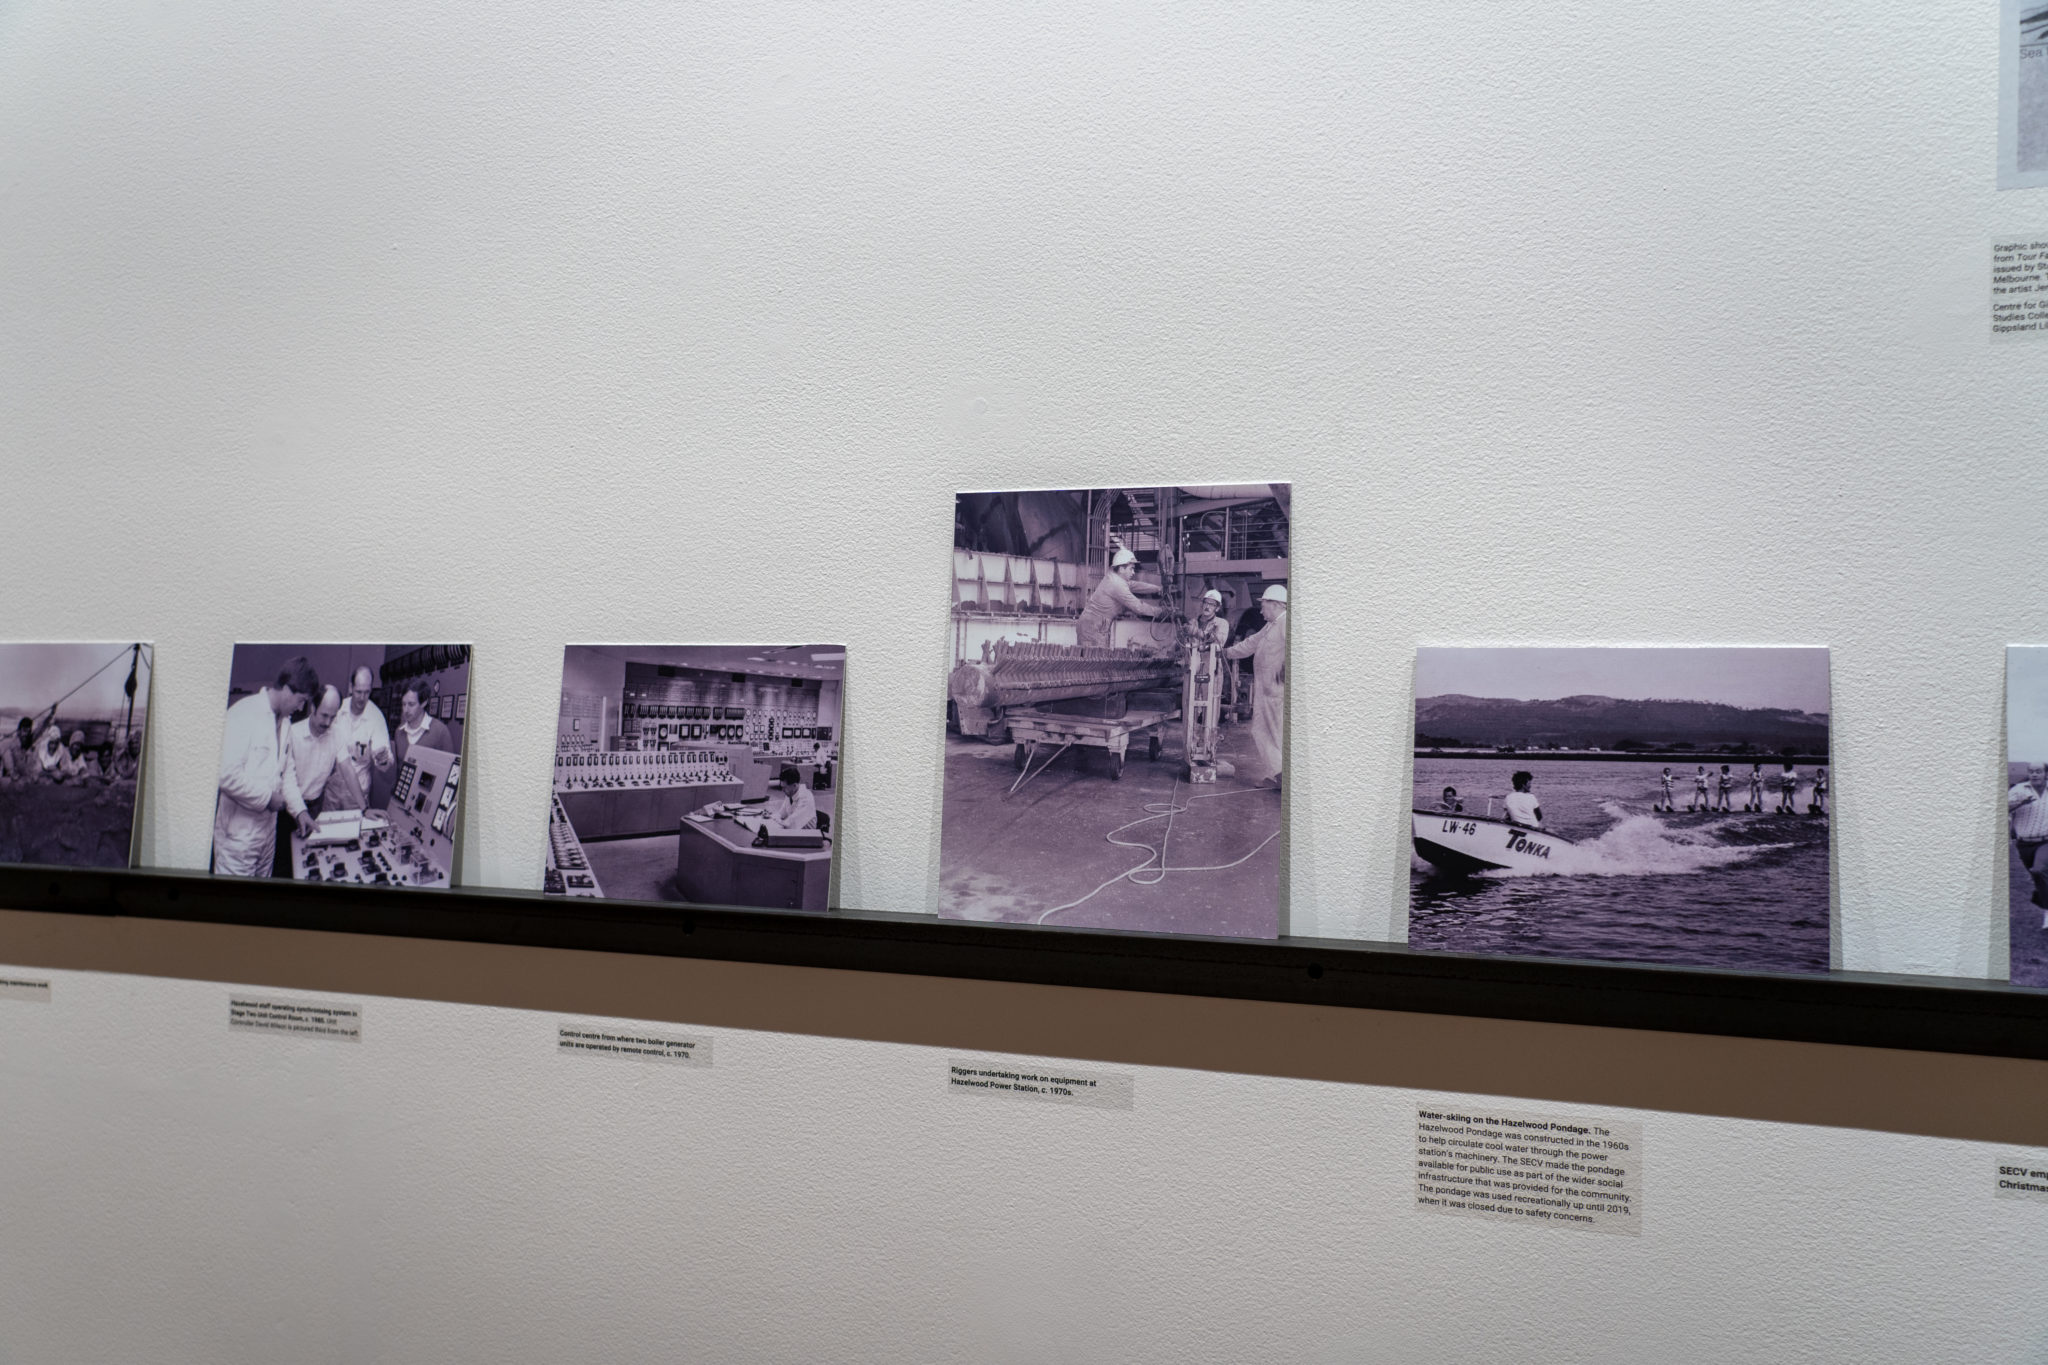 Installation view of HPS timeline, including images selected from Morwell Historical Society archives, courtesy Morwell Historical Society. Shown in Hazelwood, Gallery 4, Latrobe Regional Gallery, 2022. Image by Darryl Whitaker.